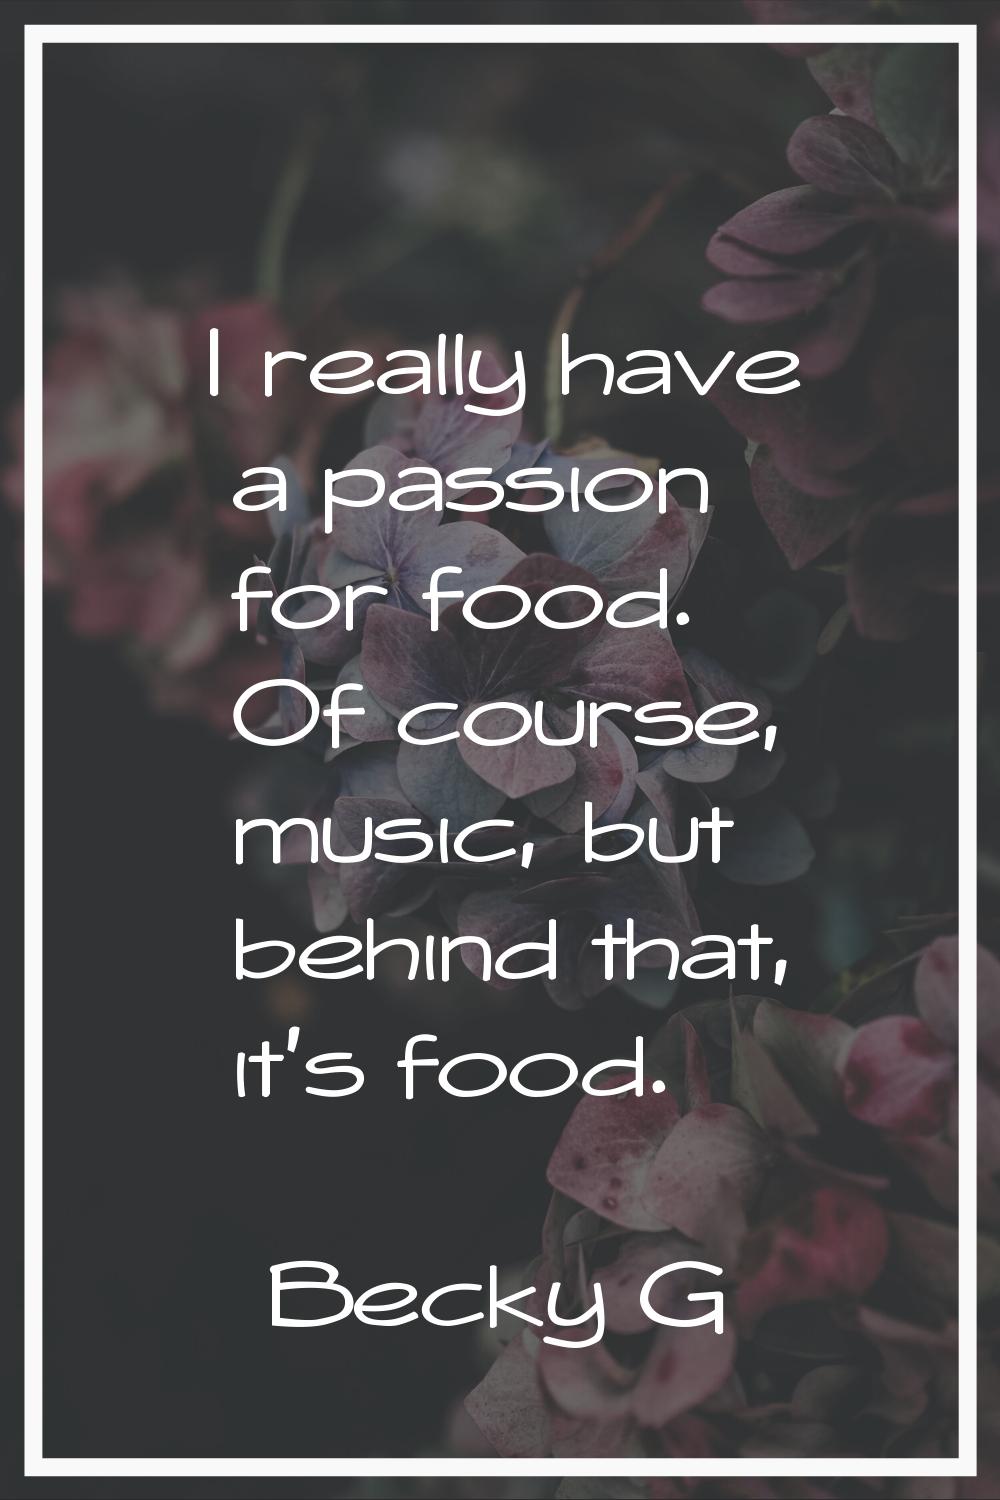 I really have a passion for food. Of course, music, but behind that, it's food.